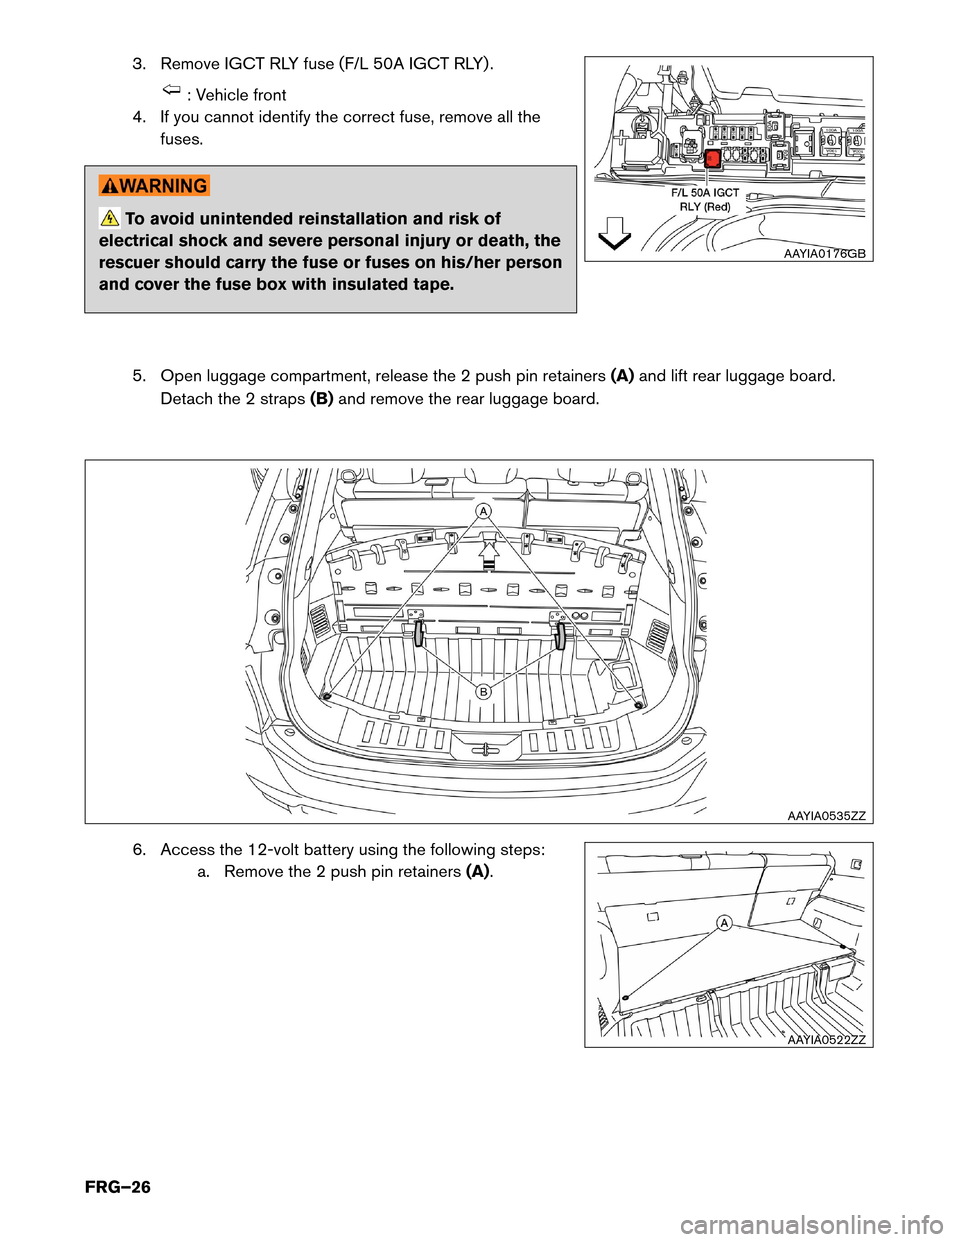 NISSAN ROGUE HYBRID 2017 2.G First Responders Guide 3. Remove IGCT RLY fuse (F/L 50A IGCT RLY) .
: Vehicle front
4.
If you cannot identify the correct fuse, remove all the
fuses. To avoid unintended reinstallation and risk of
electrical
 shock and seve